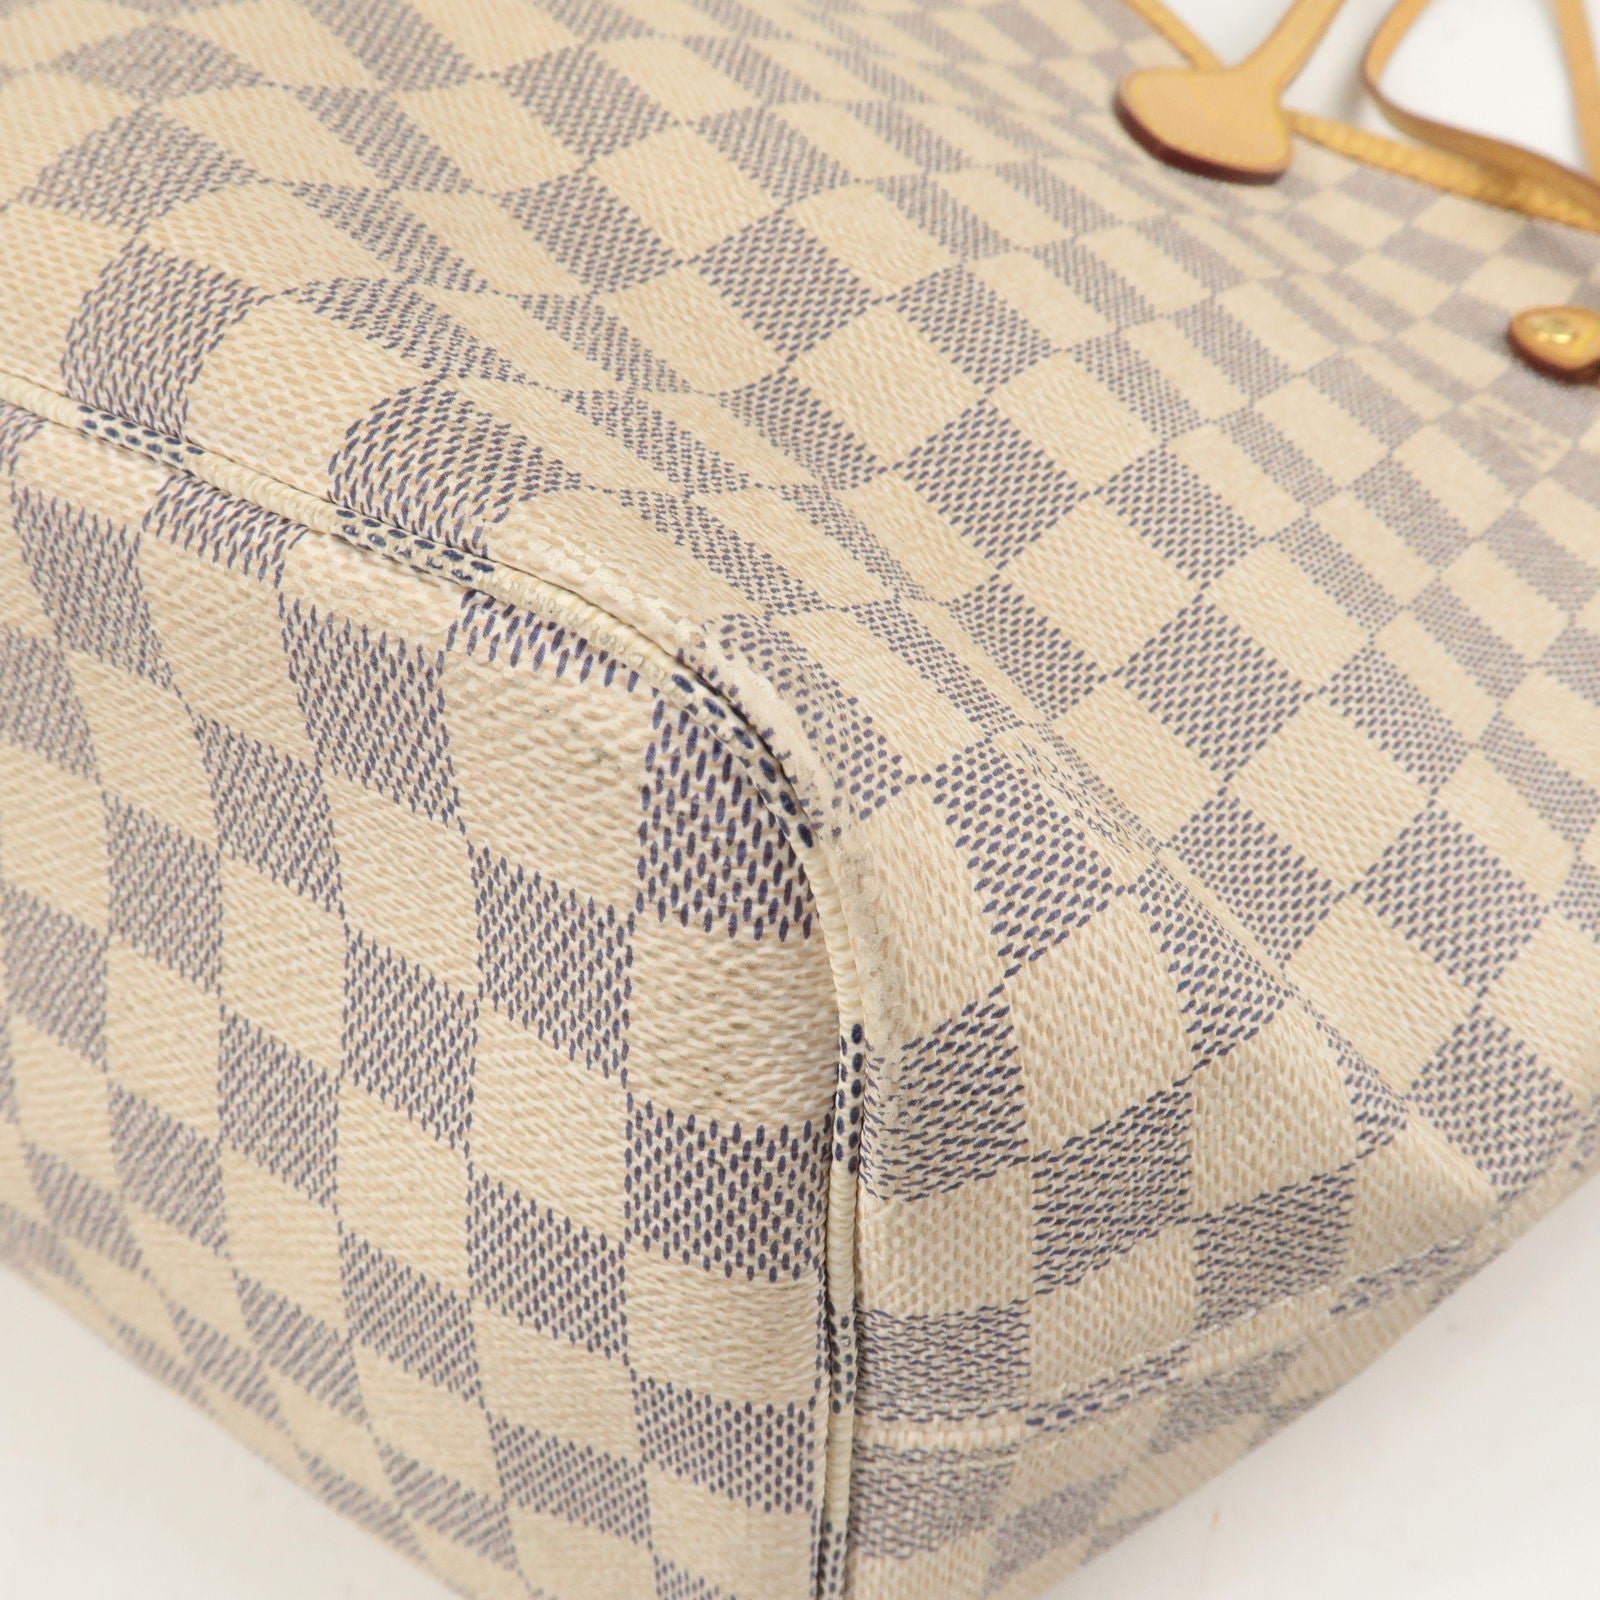 Pre-Owned Louis Vuitton Neverfull Damier Azur MM Tote Bag - Very